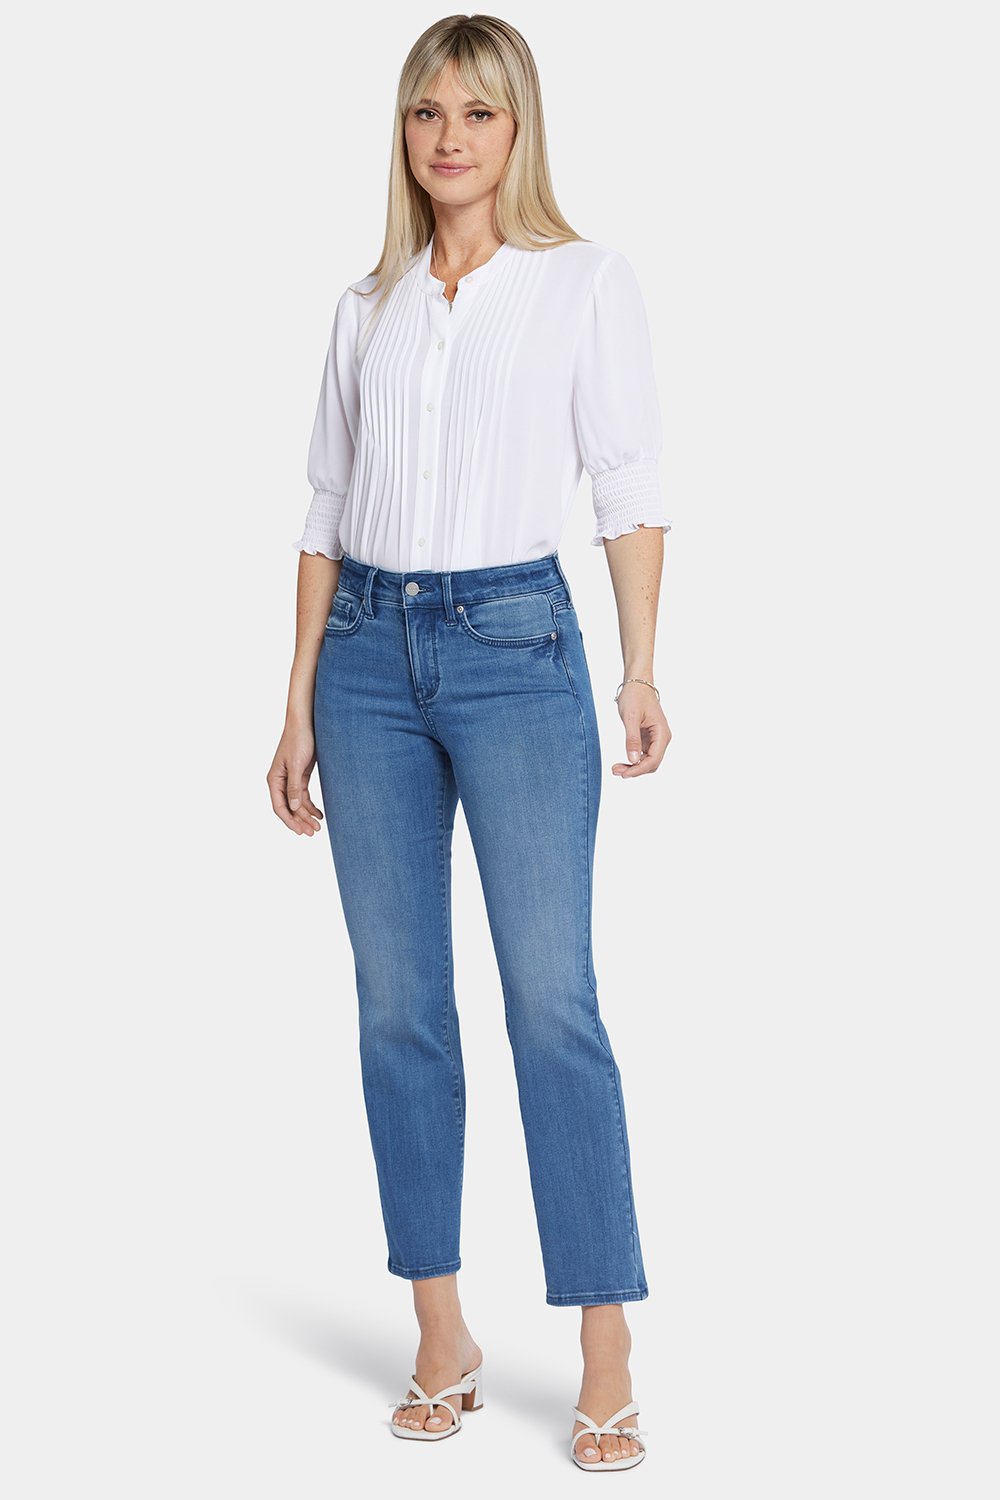 Women's Jeans - Skinny, Flared, Straight & Cropped